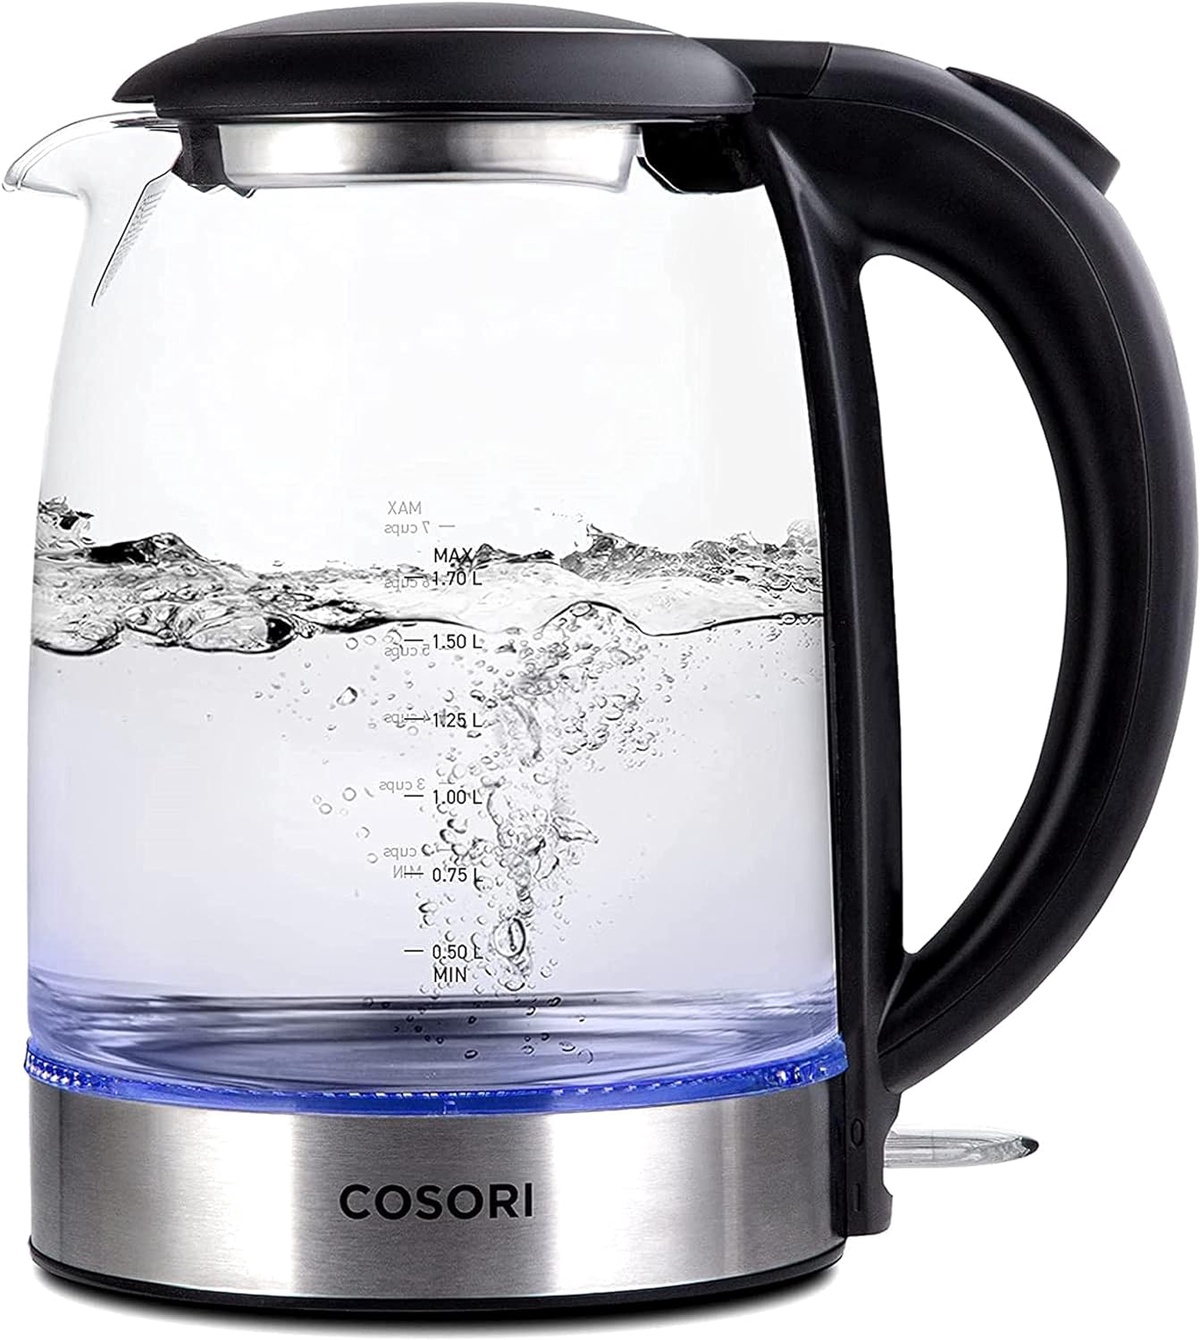 COSORI Electric Tea Kettle for Boiling Water, Stainless Steel Inner Lid & Filter